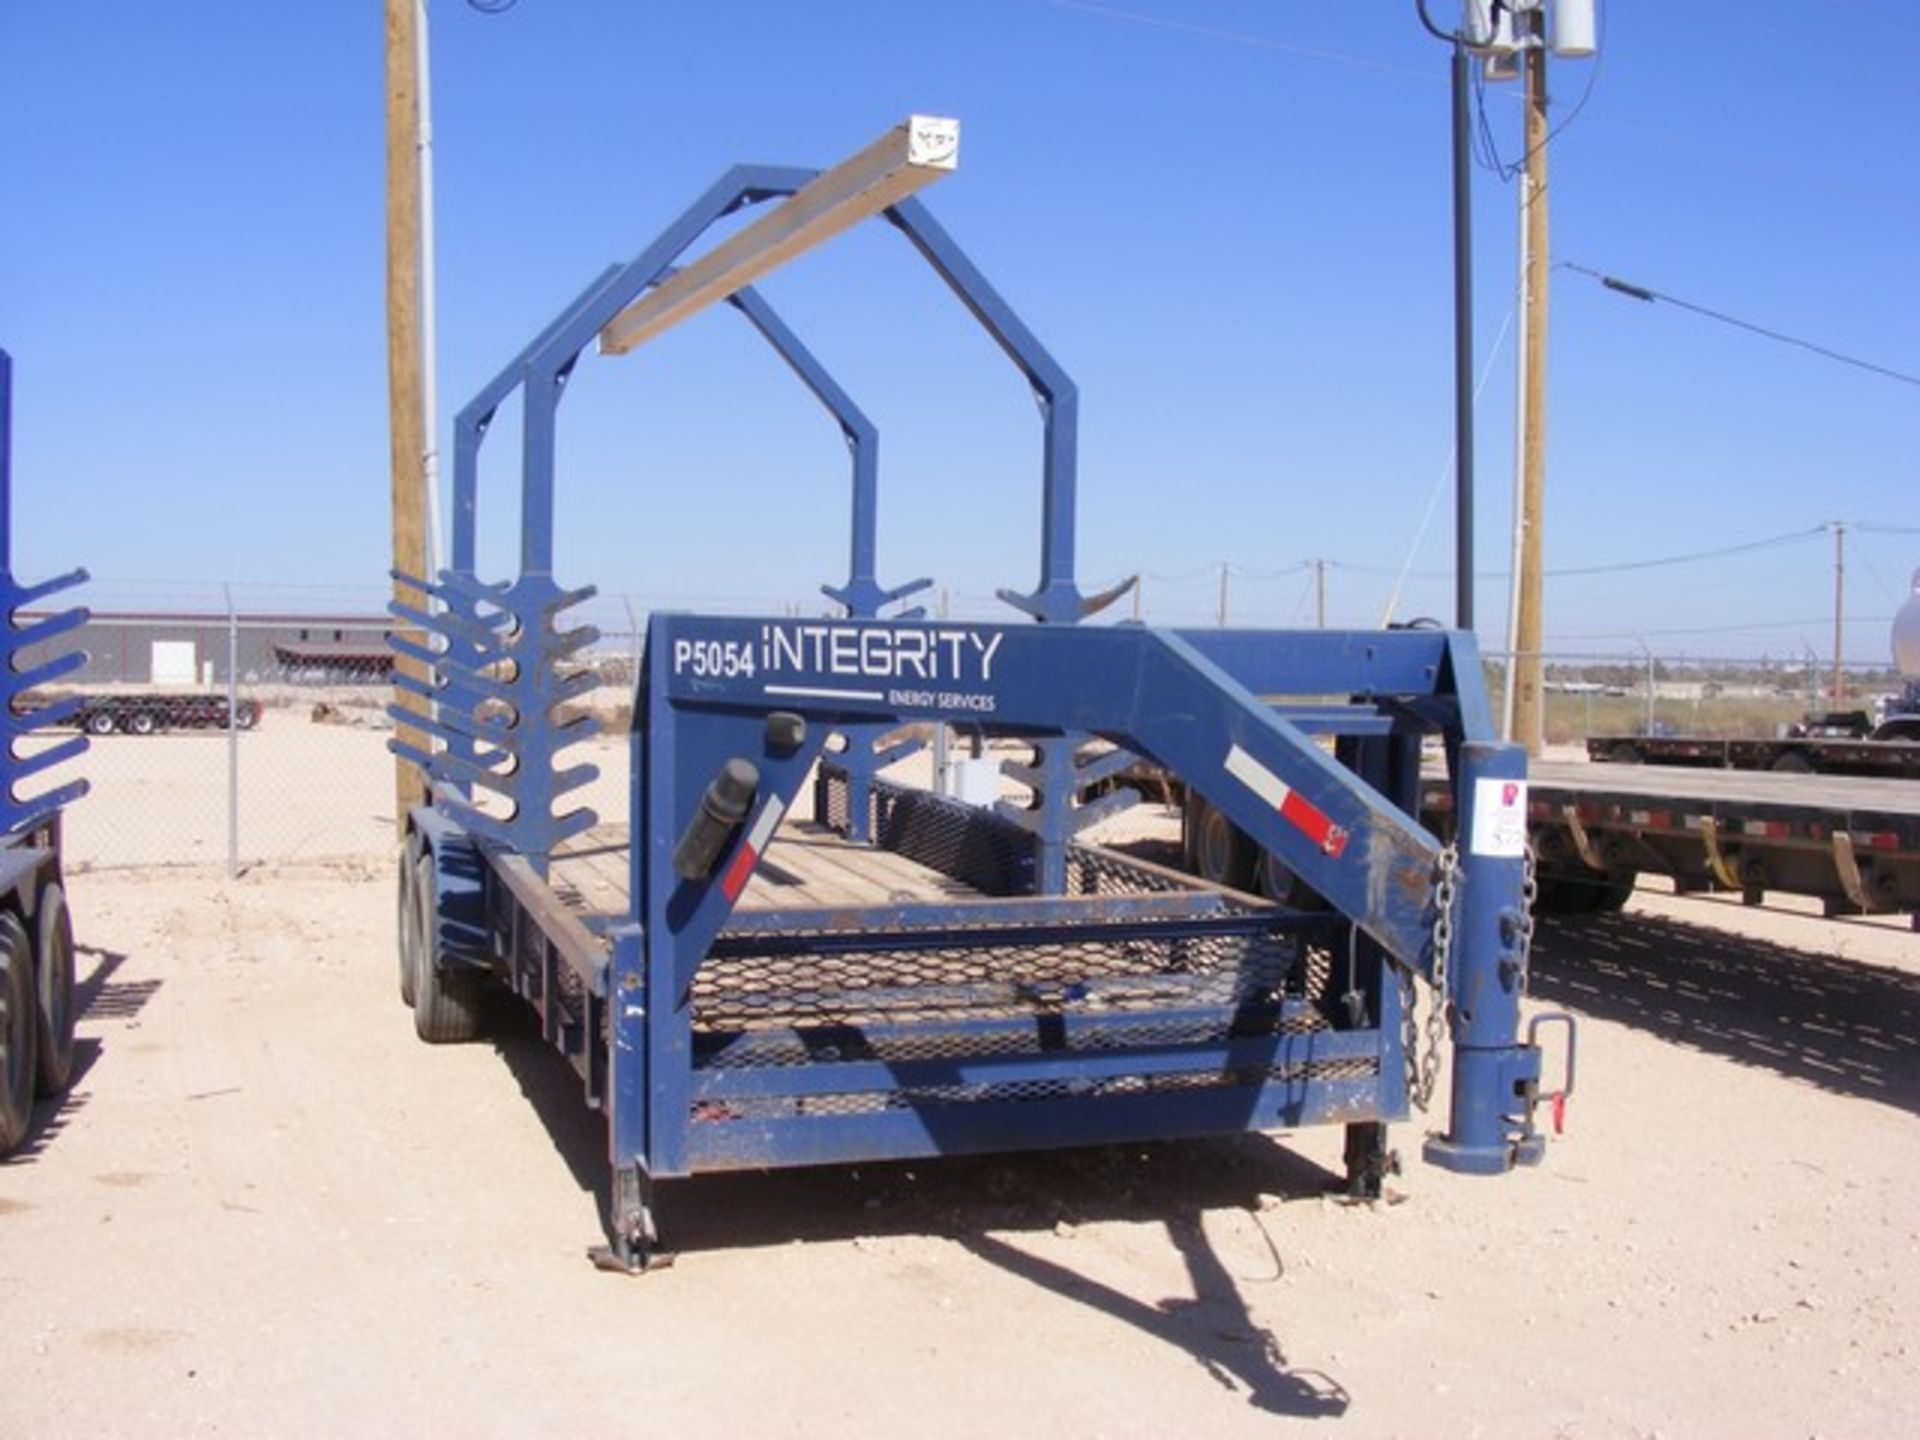 Located in YARD 1 - Midland, TX (P5054) (2360) (X) 2019 PULL DO T/A COMBO MONORAIL/ TOOL TRAILER, - Bild 2 aus 4